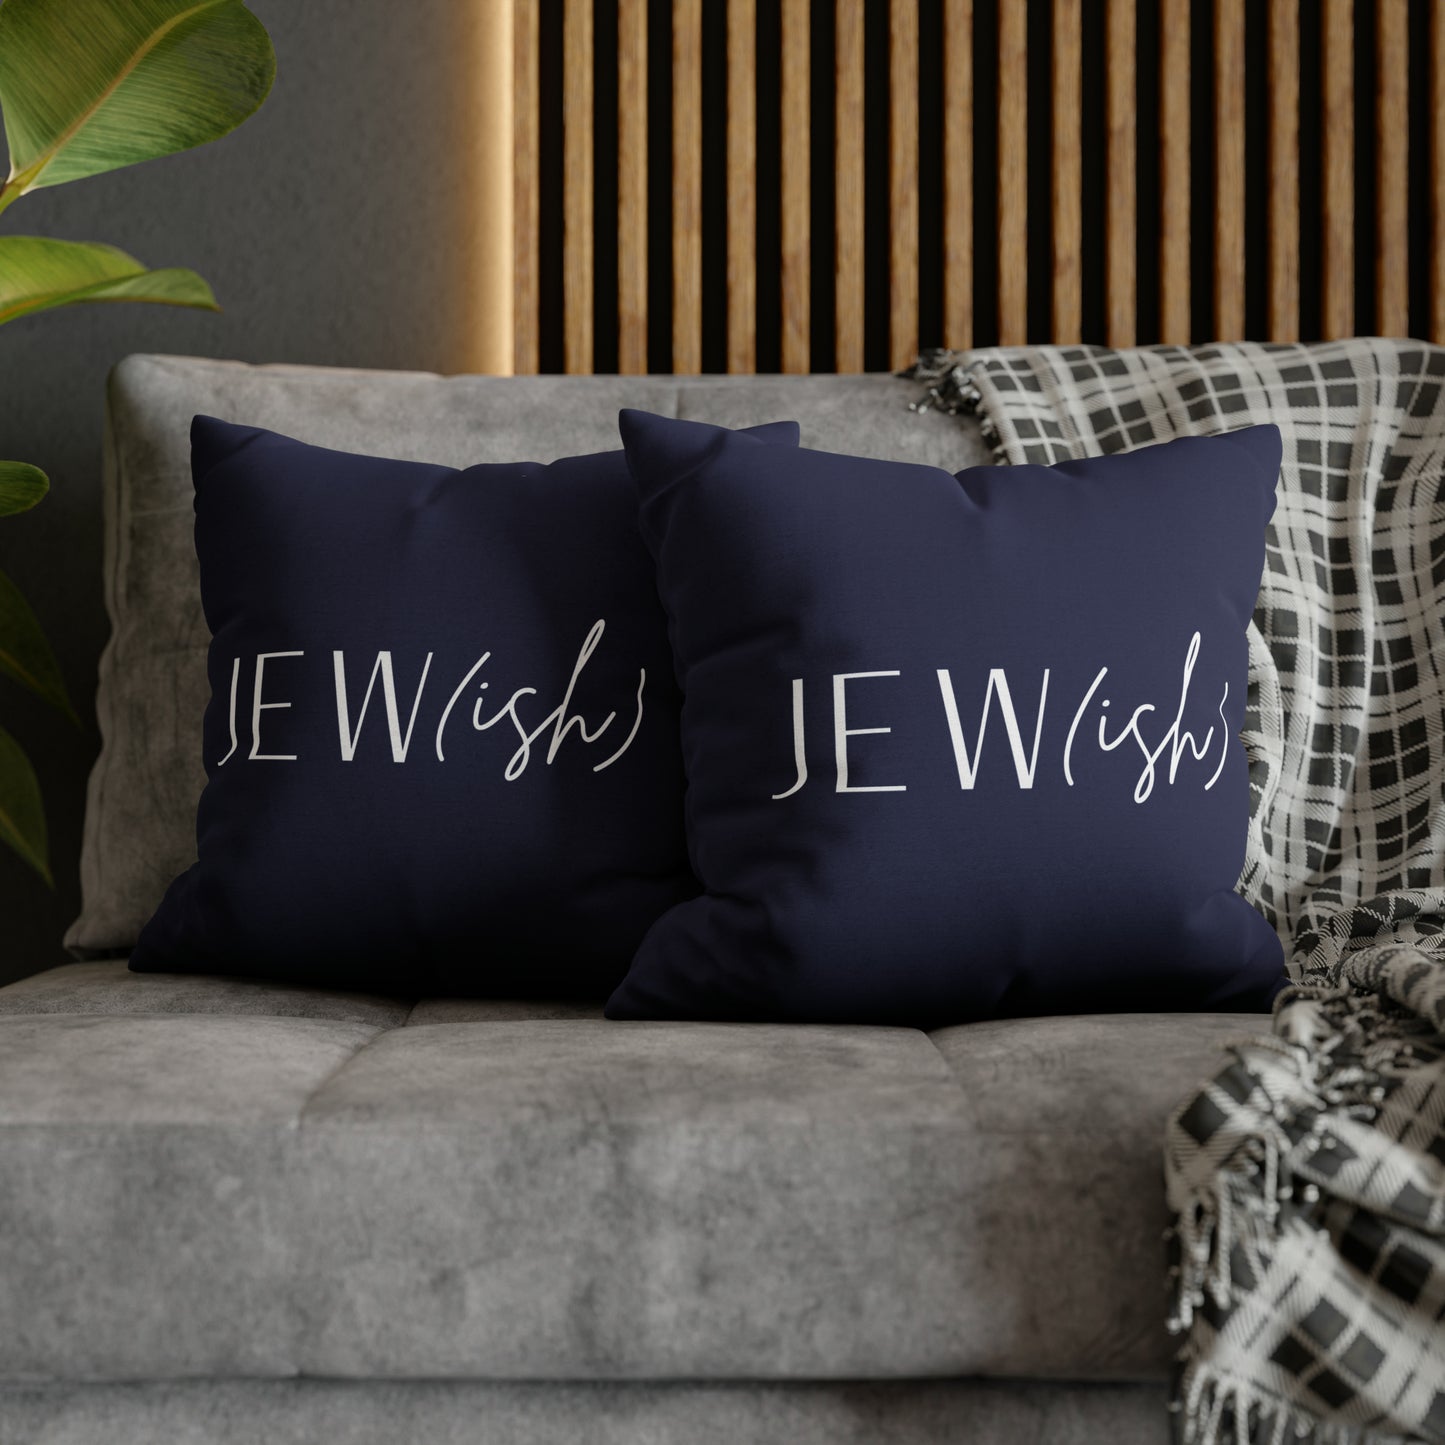 "Jew(ish)" funny hanukkah  couch pillow covers on a couch